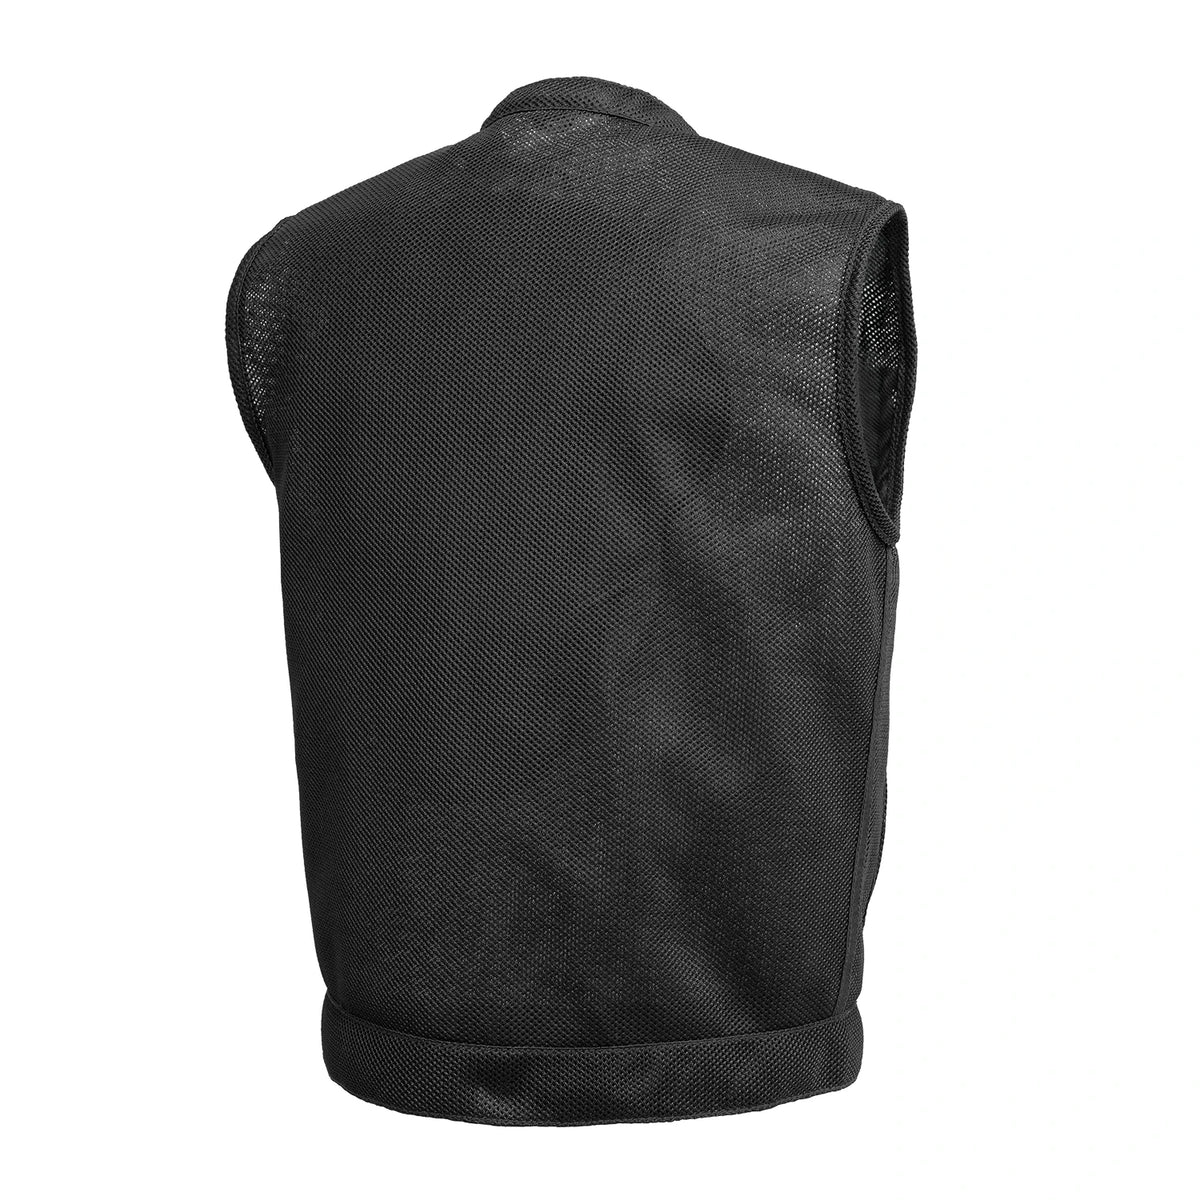 Sharp Shooter Perforated Men's Motorcycle Leather Vest - First MFG 